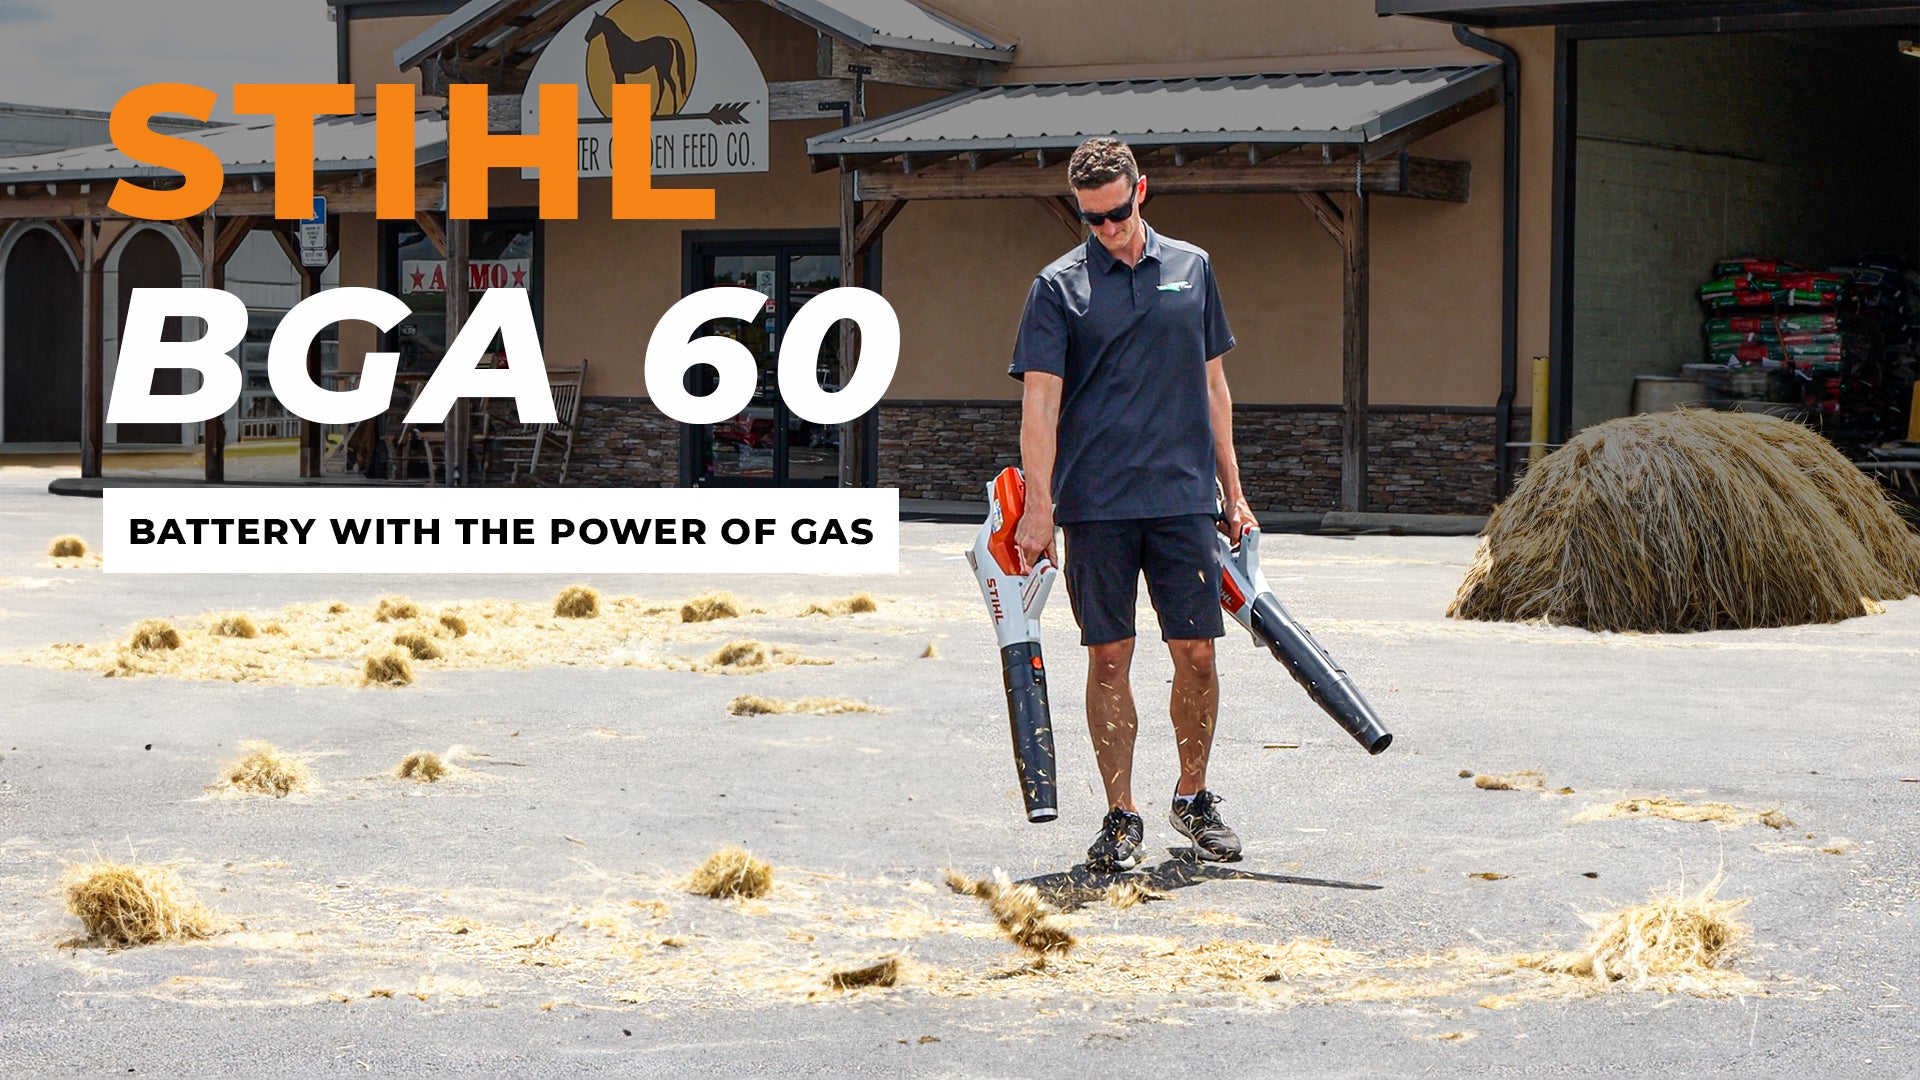 Get the scoop on the new STIHL BGA 60! Our first look reveals all you need to know about this powerful leaf blower.